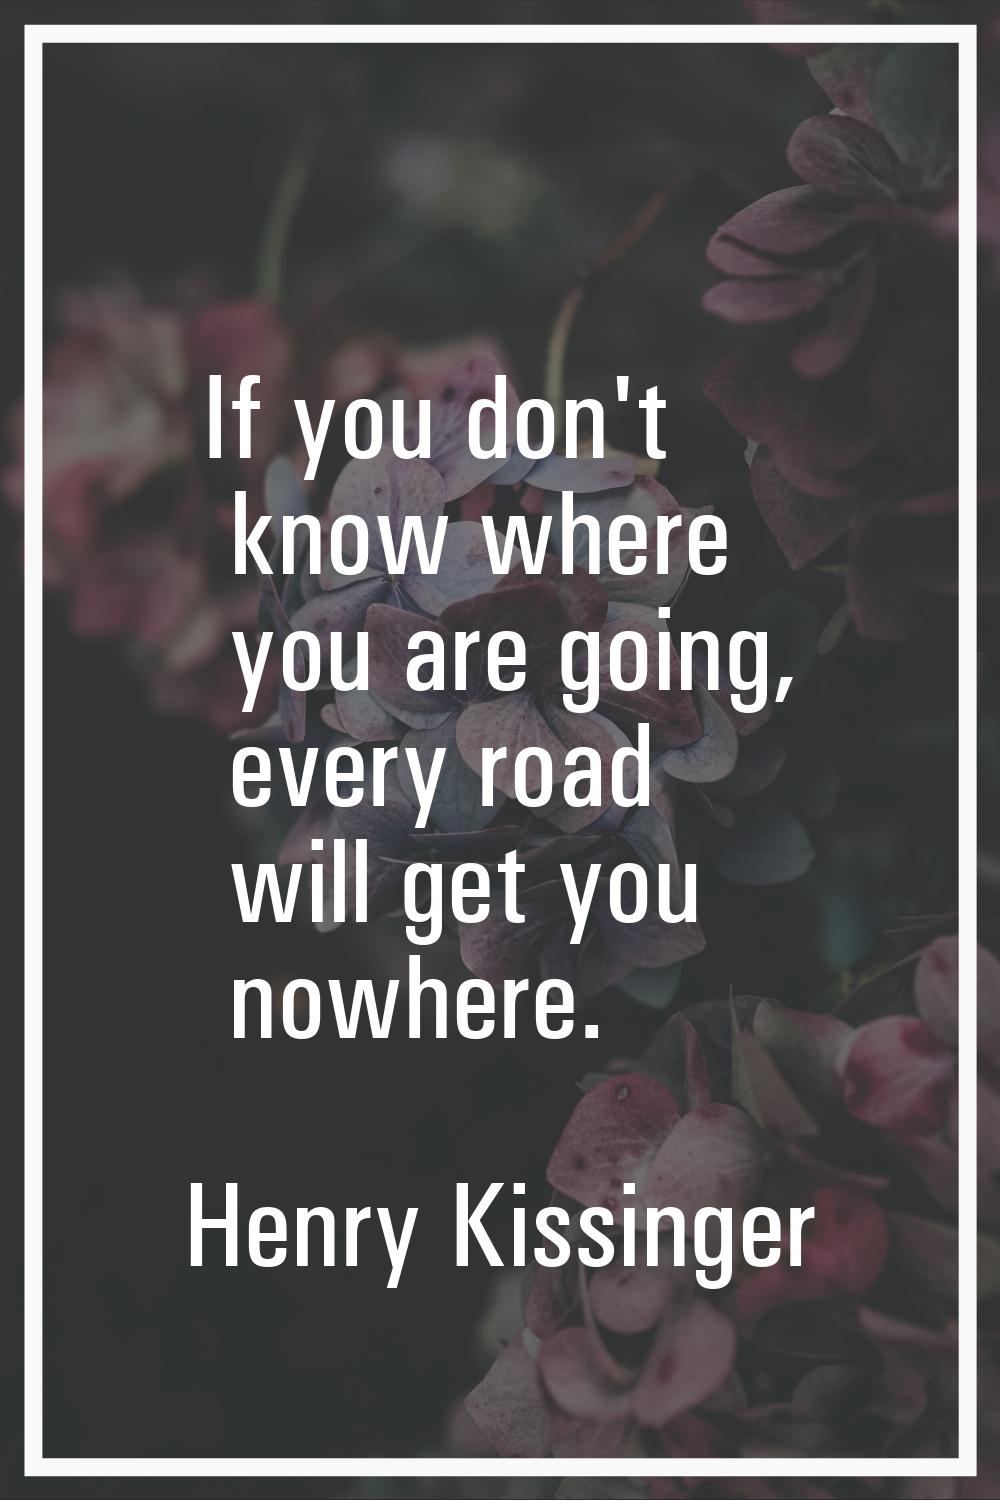 If you don't know where you are going, every road will get you nowhere.